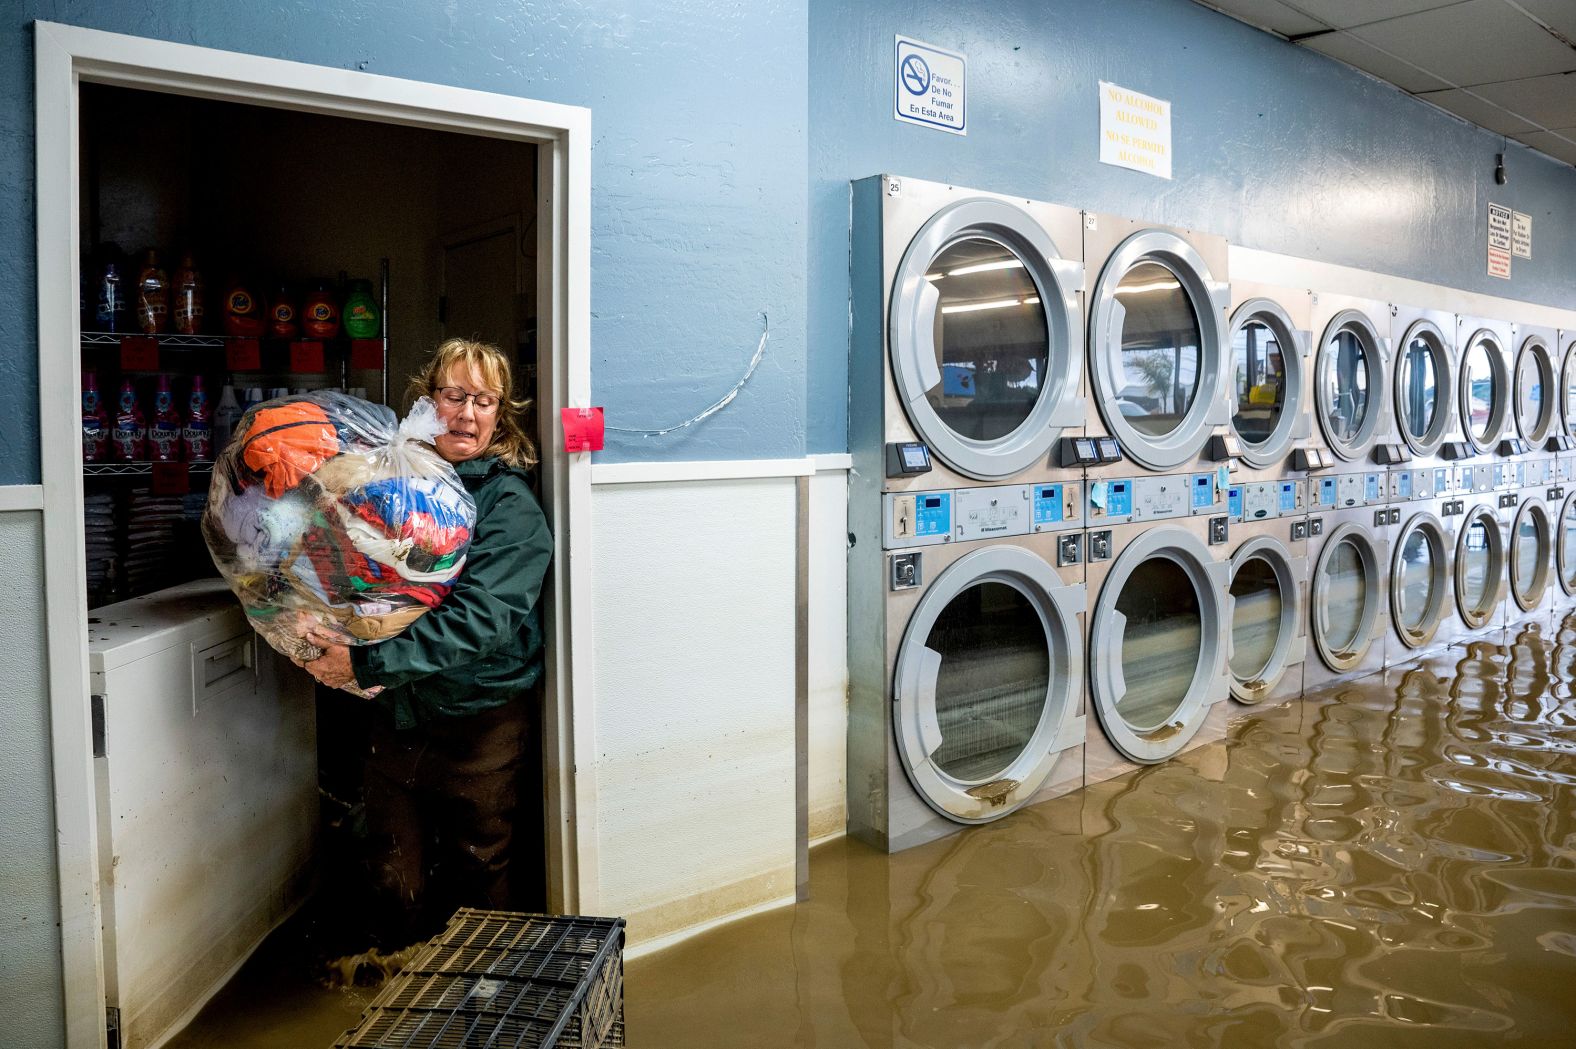 Pamela Cerruti carries a trash bag filled with clothing while wading through floodwaters at a laundromat in Monterey County, California, on Tuesday, March 14. The state faced severe flooding after <a href="index.php?page=&url=https%3A%2F%2Fwww.cnn.com%2F2023%2F03%2F15%2Fweather%2Fcalifornia-atmospheric-river-flood-wednesday%2Findex.html" target="_blank">an onslaught of dangerous storms</a>.